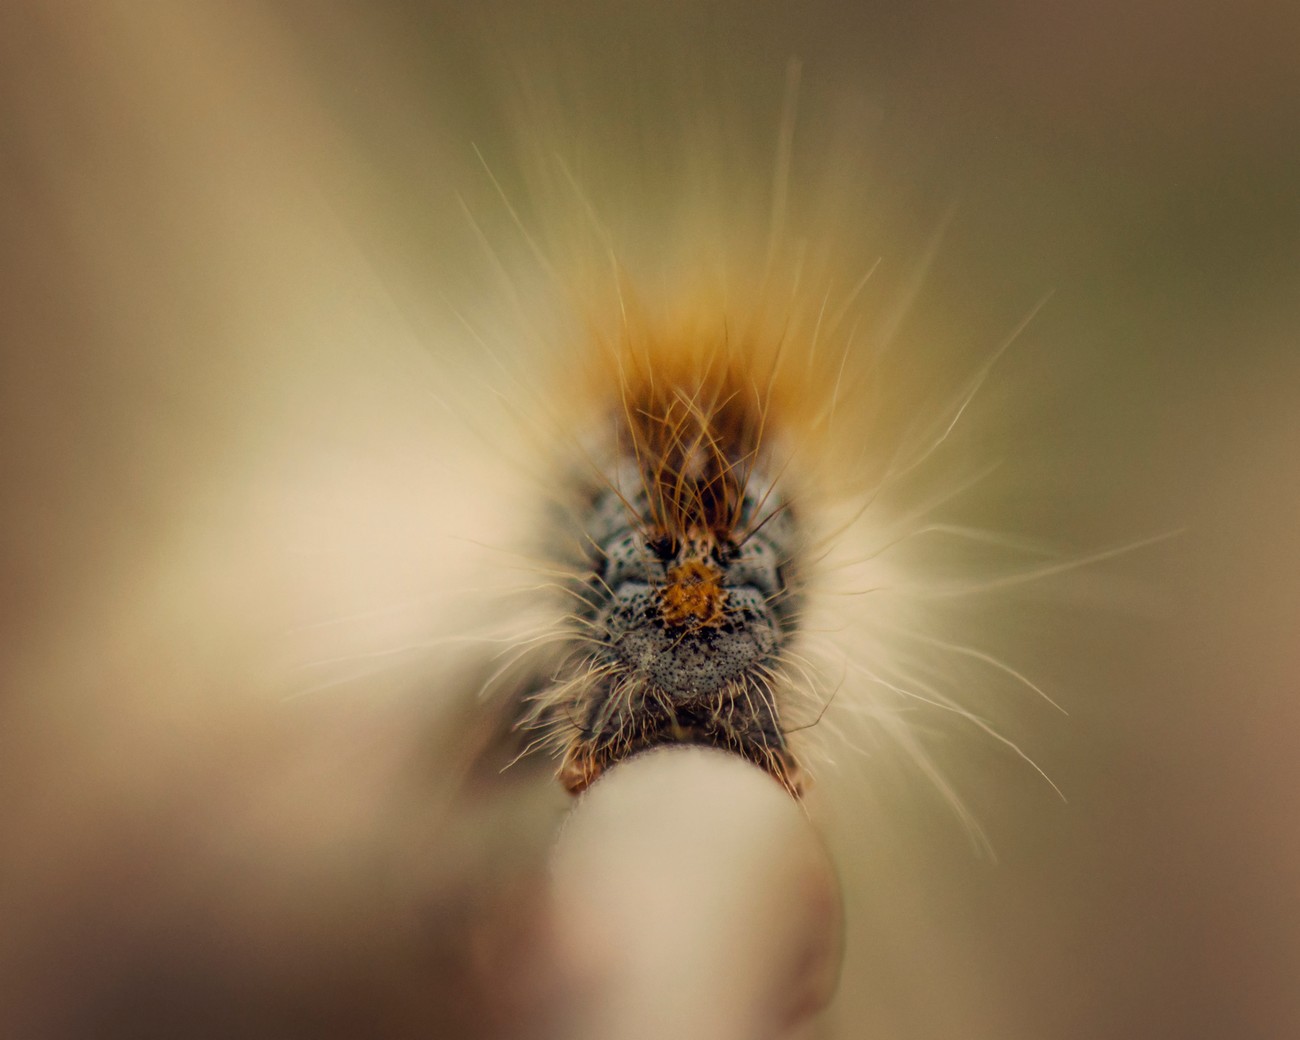 Tiny Things In Nature Photo Contest Winner